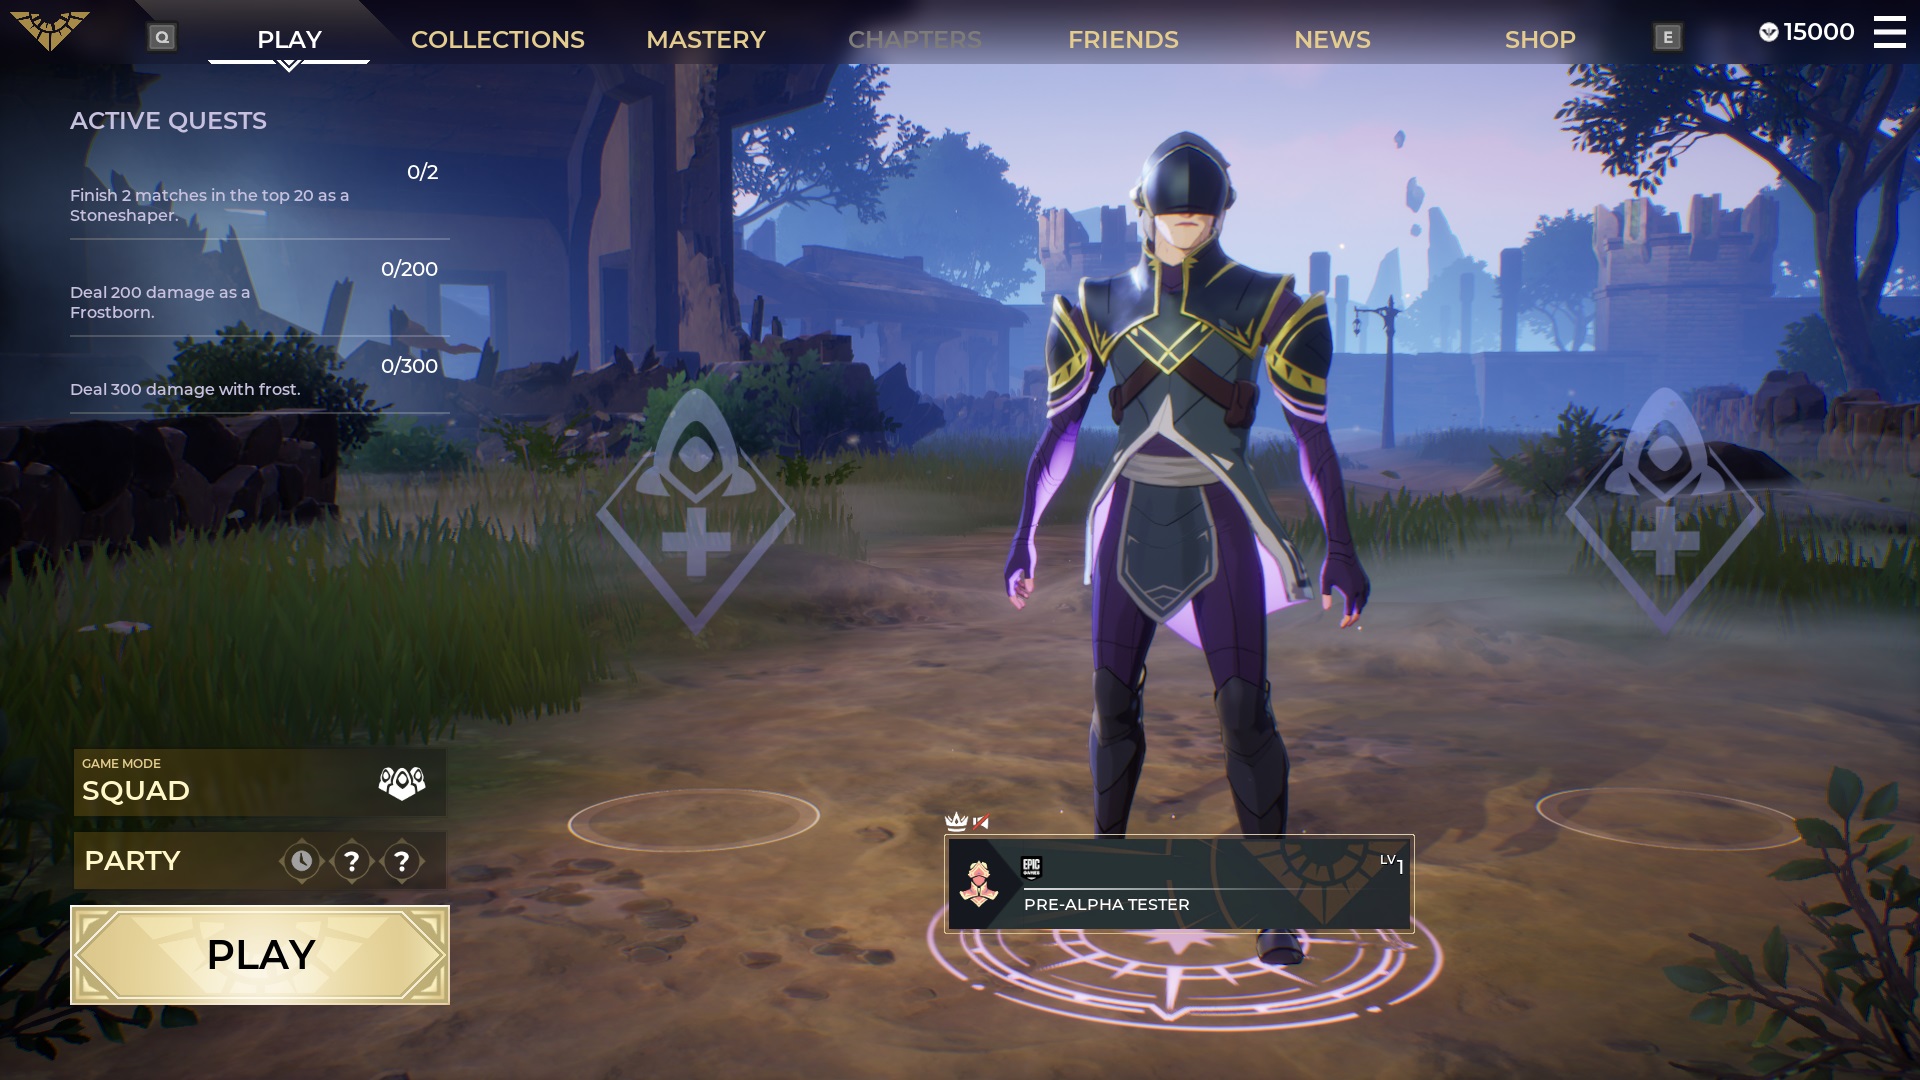  How to carry over content from your alpha/beta account to your launch account in Spellbreak 